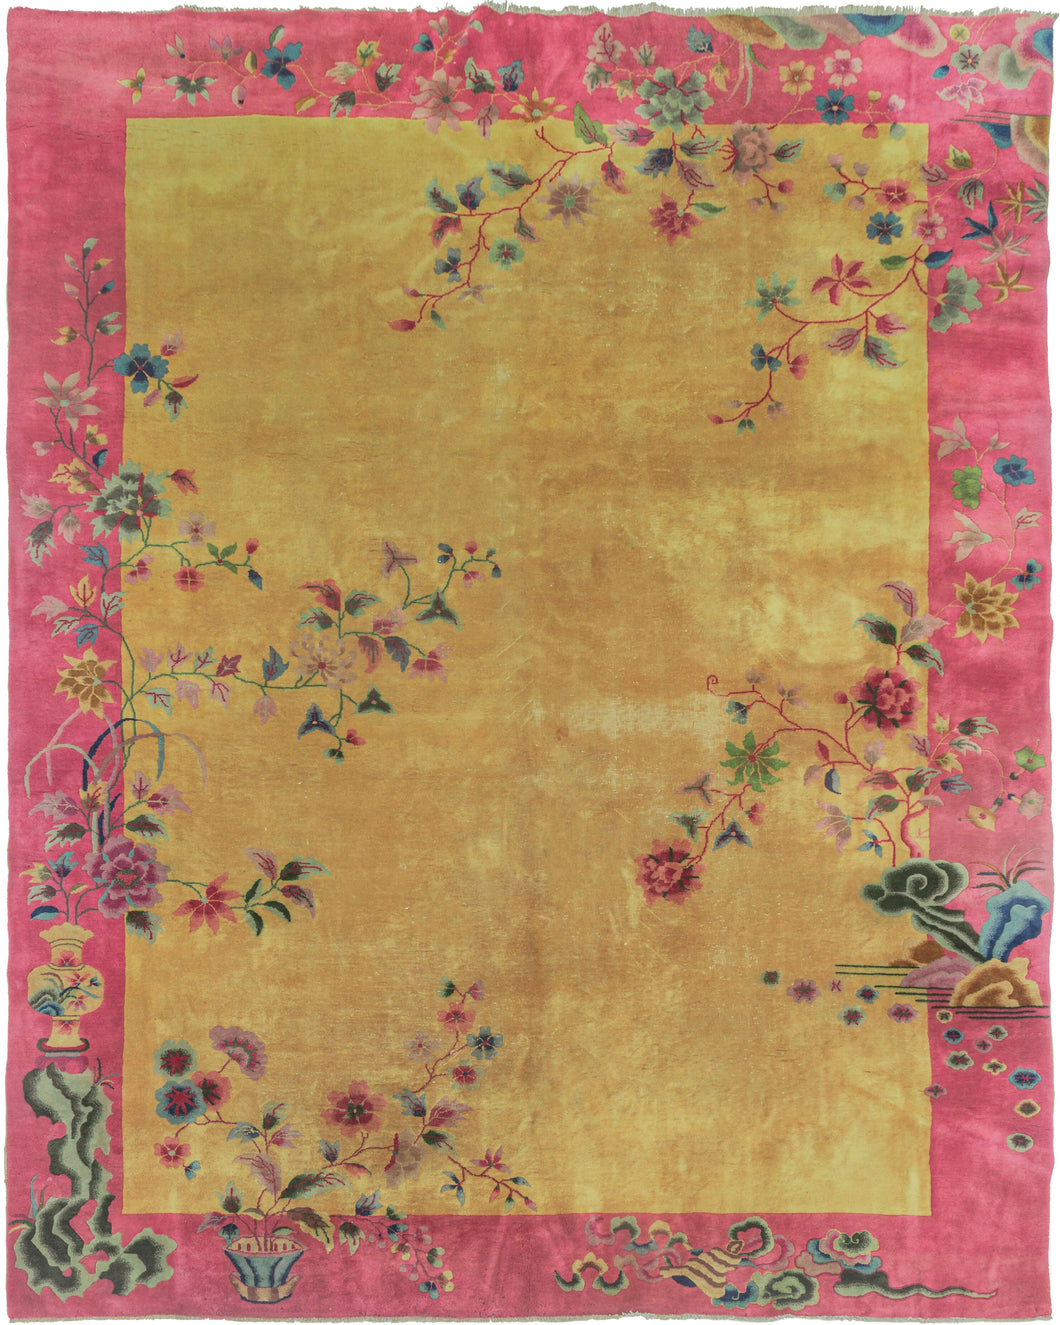 Vibrant golden antique Chinese Deco rug with a pink border and a rainbow of flowers, vases and textural rocks finely knotted into the design